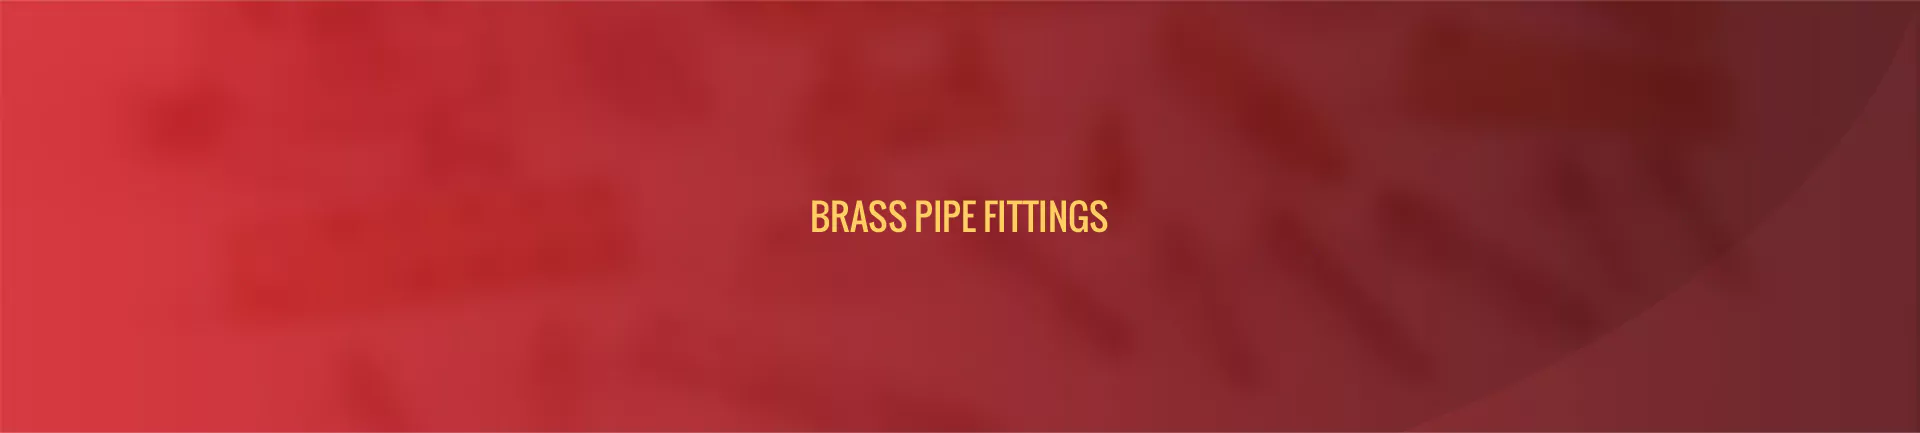 brass-pipe-fittings-banner